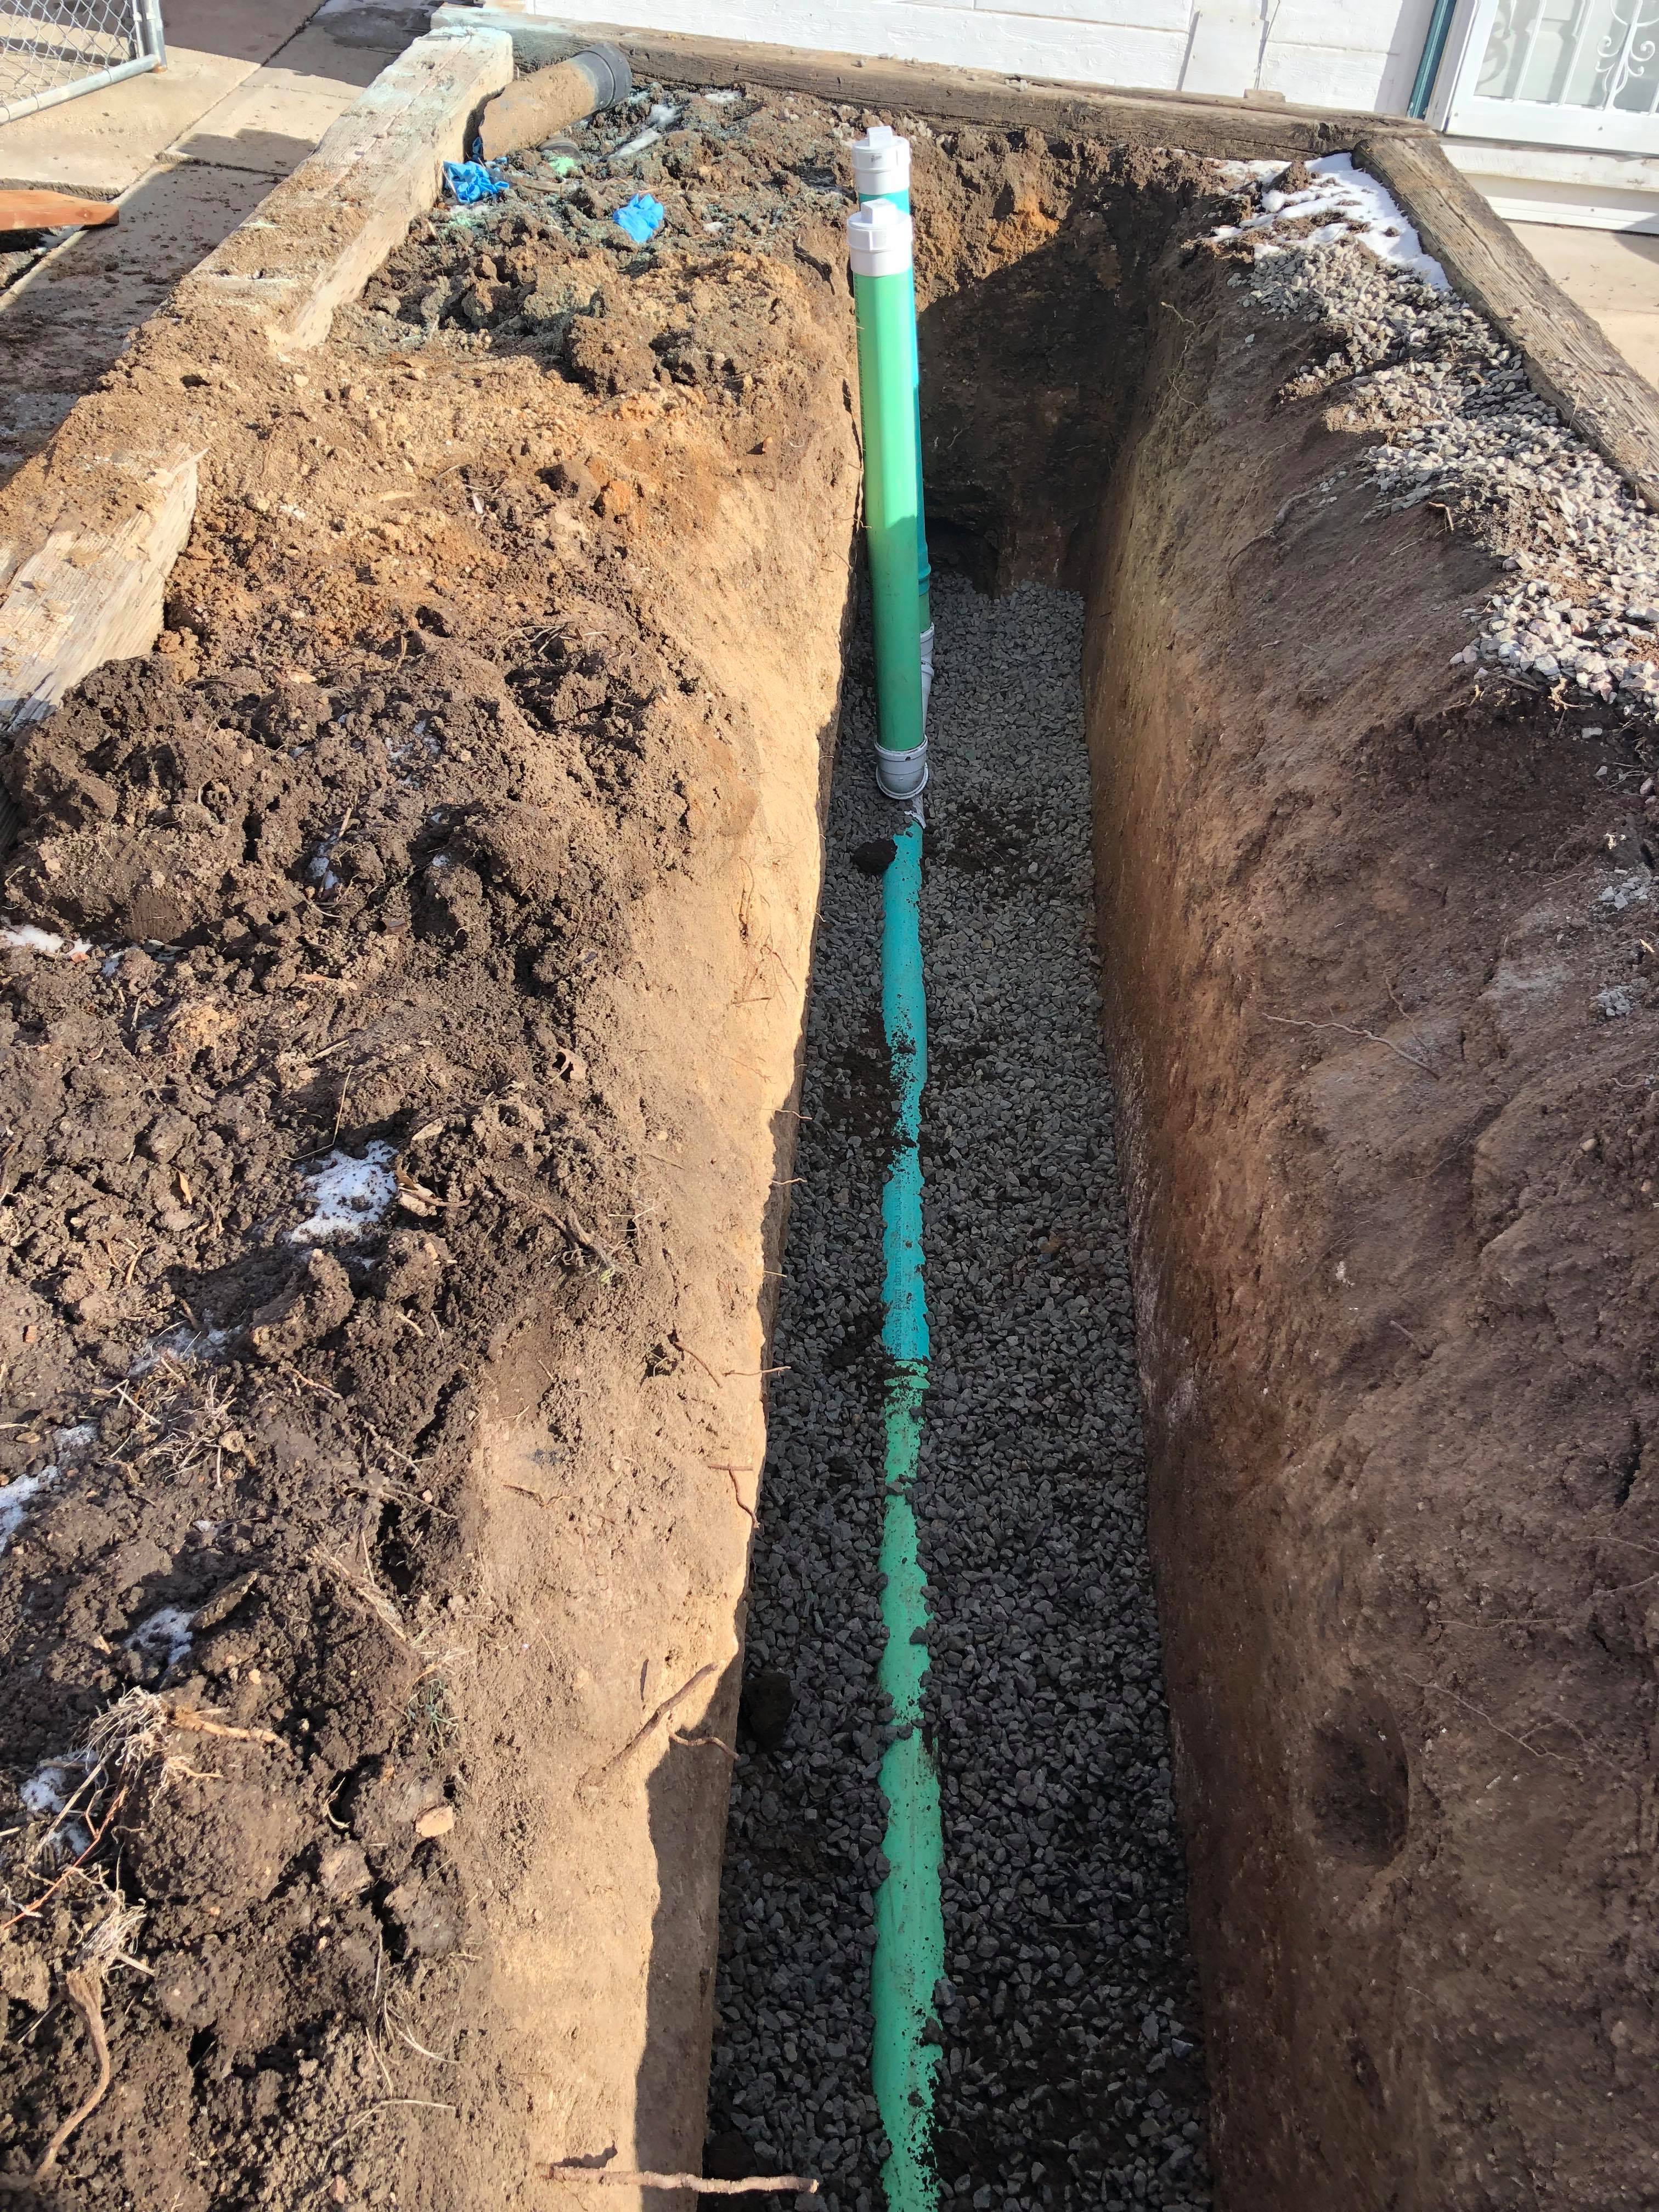 A new sewer line replacement in Broomfield, CO.